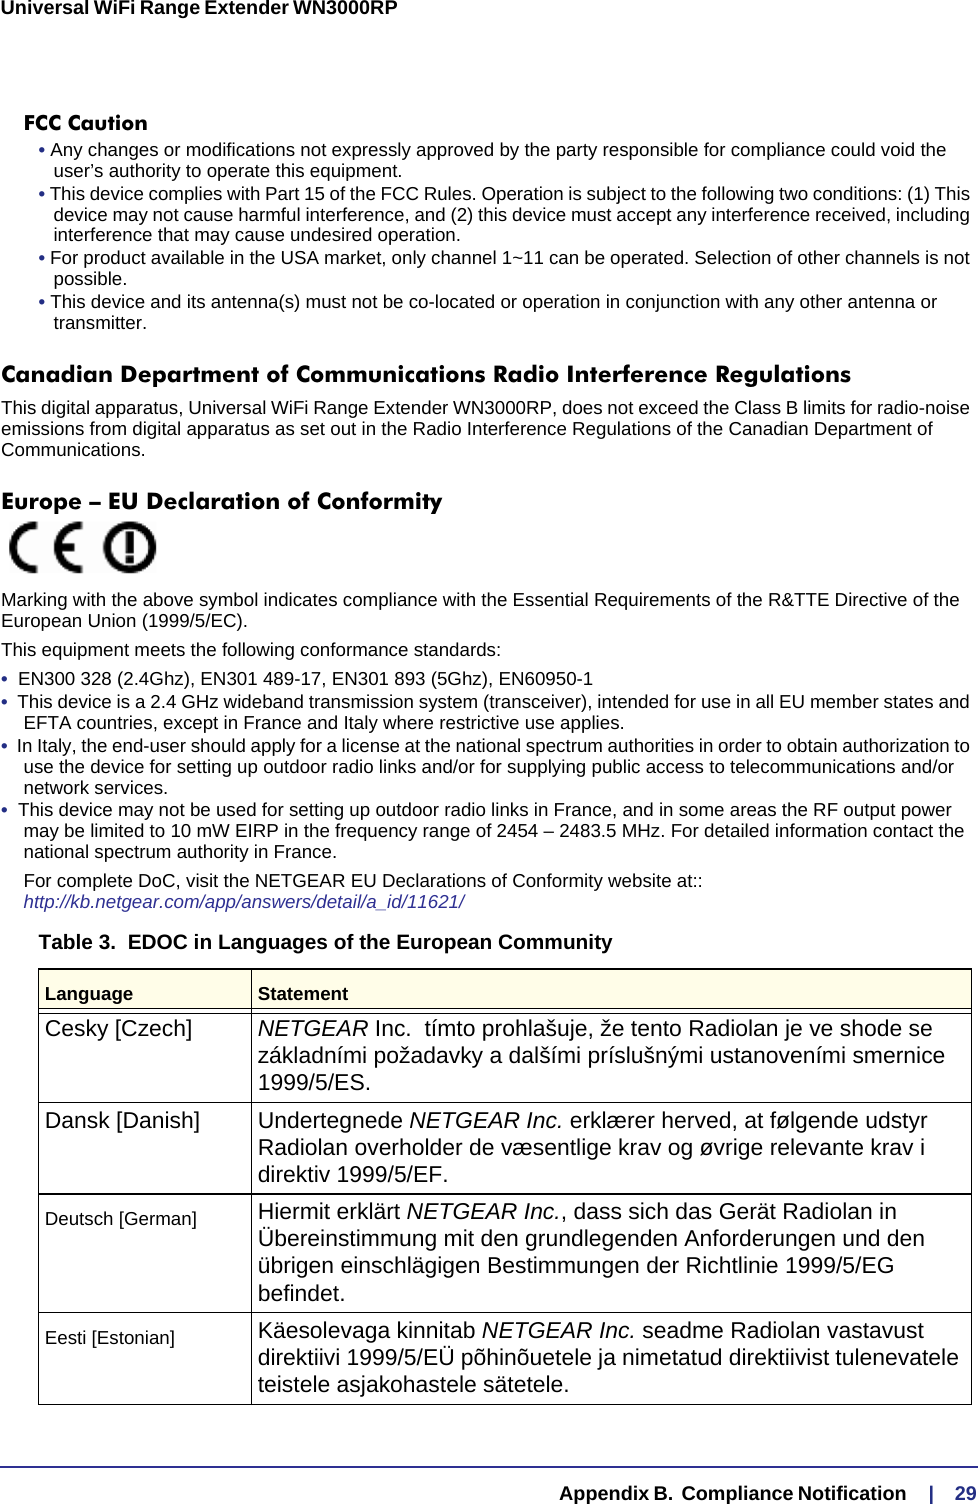   Appendix B.  Compliance Notification     |    29Universal WiFi Range Extender WN3000RP FCC Caution• Any changes or modifications not expressly approved by the party responsible for compliance could void the user’s authority to operate this equipment. • This device complies with Part 15 of the FCC Rules. Operation is subject to the following two conditions: (1) This device may not cause harmful interference, and (2) this device must accept any interference received, including interference that may cause undesired operation. • For product available in the USA market, only channel 1~11 can be operated. Selection of other channels is not possible.• This device and its antenna(s) must not be co-located or operation in conjunction with any other antenna or transmitter.Canadian Department of Communications Radio Interference RegulationsThis digital apparatus, Universal WiFi Range Extender WN3000RP, does not exceed the Class B limits for radio-noise emissions from digital apparatus as set out in the Radio Interference Regulations of the Canadian Department of Communications.Europe – EU Declaration of Conformity Marking with the above symbol indicates compliance with the Essential Requirements of the R&amp;TTE Directive of the European Union (1999/5/EC). This equipment meets the following conformance standards:•  EN300 328 (2.4Ghz), EN301 489-17, EN301 893 (5Ghz), EN60950-1•  This device is a 2.4 GHz wideband transmission system (transceiver), intended for use in all EU member states and EFTA countries, except in France and Italy where restrictive use applies.•  In Italy, the end-user should apply for a license at the national spectrum authorities in order to obtain authorization to use the device for setting up outdoor radio links and/or for supplying public access to telecommunications and/or network services.•  This device may not be used for setting up outdoor radio links in France, and in some areas the RF output power may be limited to 10 mW EIRP in the frequency range of 2454 – 2483.5 MHz. For detailed information contact the national spectrum authority in France. For complete DoC, visit the NETGEAR EU Declarations of Conformity website at:: http://kb.netgear.com/app/answers/detail/a_id/11621/Table 3.  EDOC in Languages of the European CommunityLanguage StatementCesky [Czech] NETGEAR Inc.  tímto prohlašuje, že tento Radiolan je ve shode se základními požadavky a dalšími príslušnými ustanoveními smernice 1999/5/ES.Dansk [Danish] Undertegnede NETGEAR Inc. erklærer herved, at følgende udstyr Radiolan overholder de væsentlige krav og øvrige relevante krav i direktiv 1999/5/EF.Deutsch [German] Hiermit erklärt NETGEAR Inc., dass sich das Gerät Radiolan in Übereinstimmung mit den grundlegenden Anforderungen und den übrigen einschlägigen Bestimmungen der Richtlinie 1999/5/EG befindet.Eesti [Estonian] Käesolevaga kinnitab NETGEAR Inc. seadme Radiolan vastavust direktiivi 1999/5/EÜ põhinõuetele ja nimetatud direktiivist tulenevatele teistele asjakohastele sätetele.